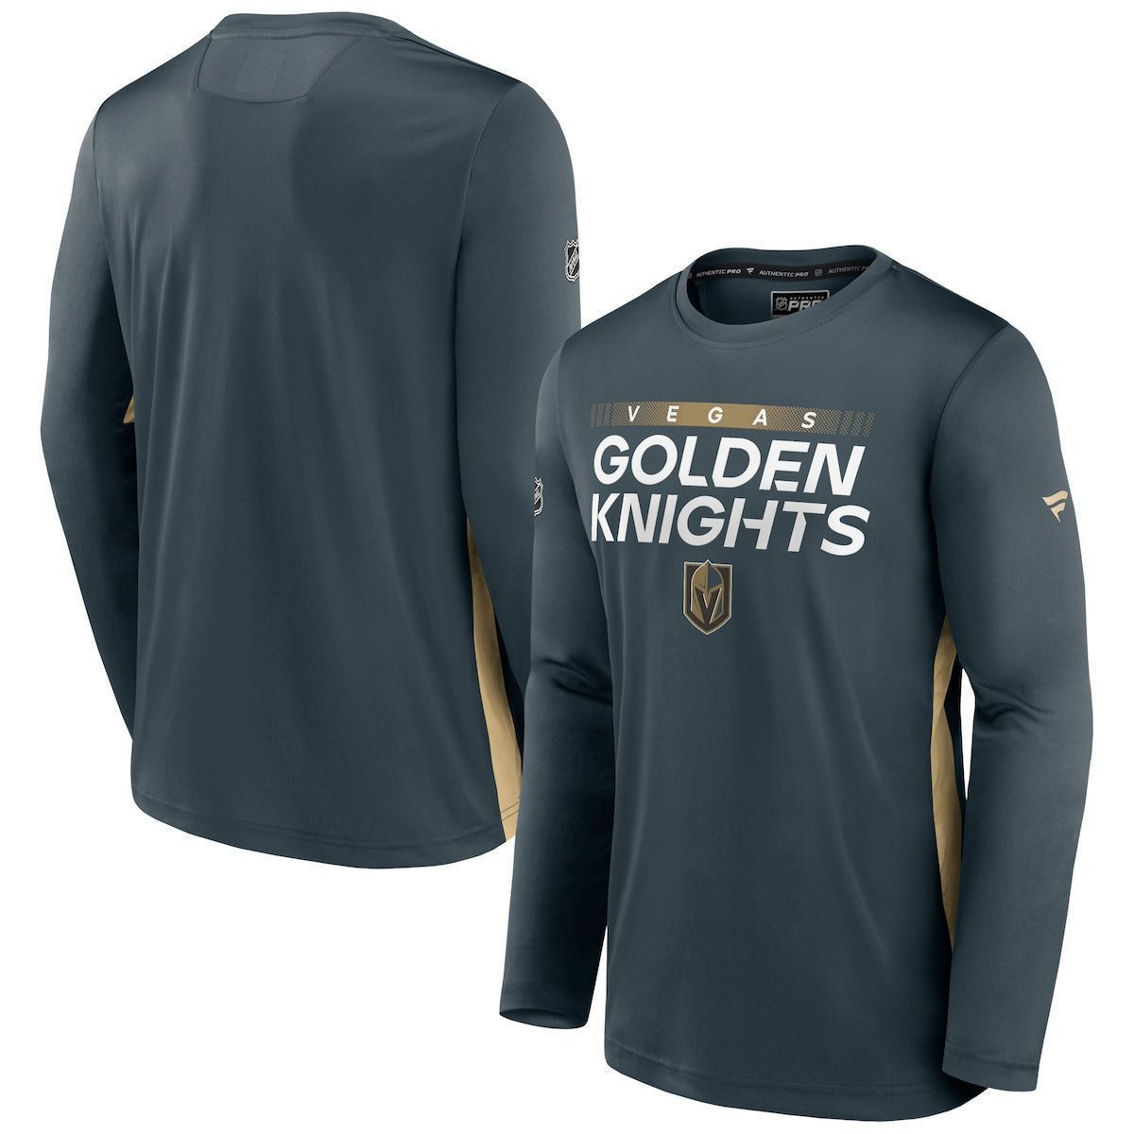 Fanatics Branded Men's Gray Vegas Golden Knights Authentic Pro Rink Performance Long Sleeve T-Shirt - Image 2 of 4